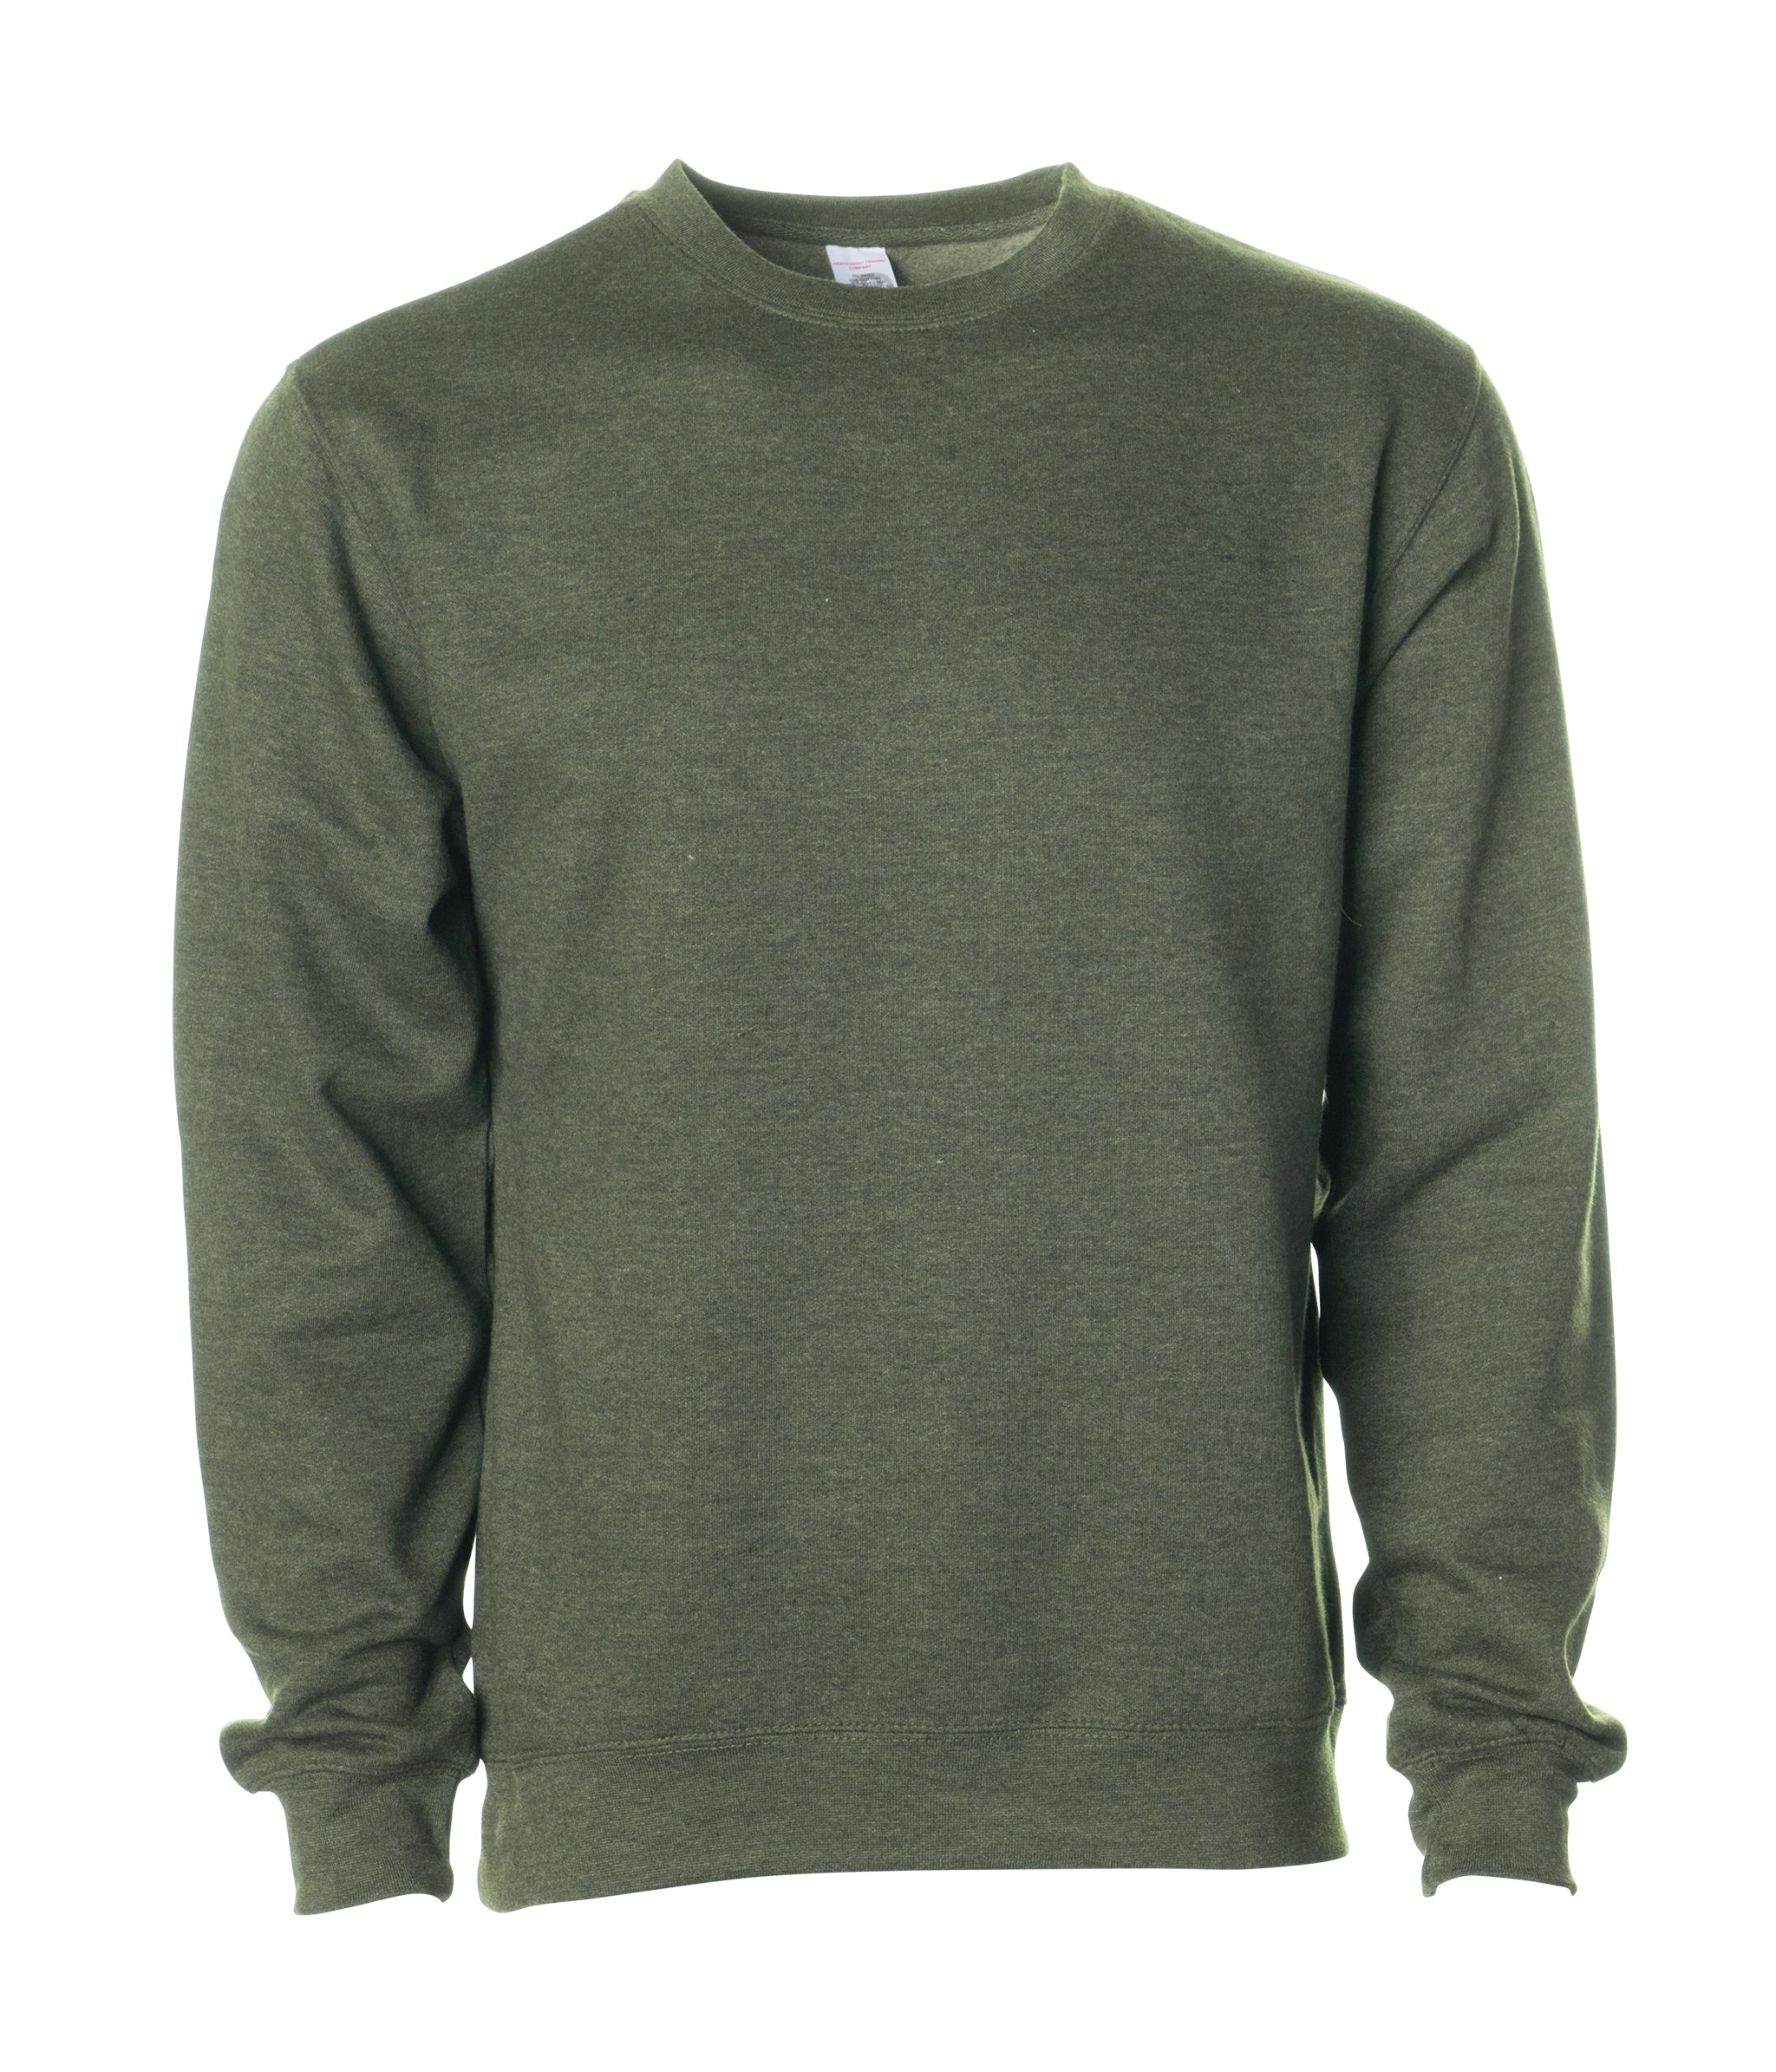 Men's Midweight Crew Sweatshirt | Basic Color Collection